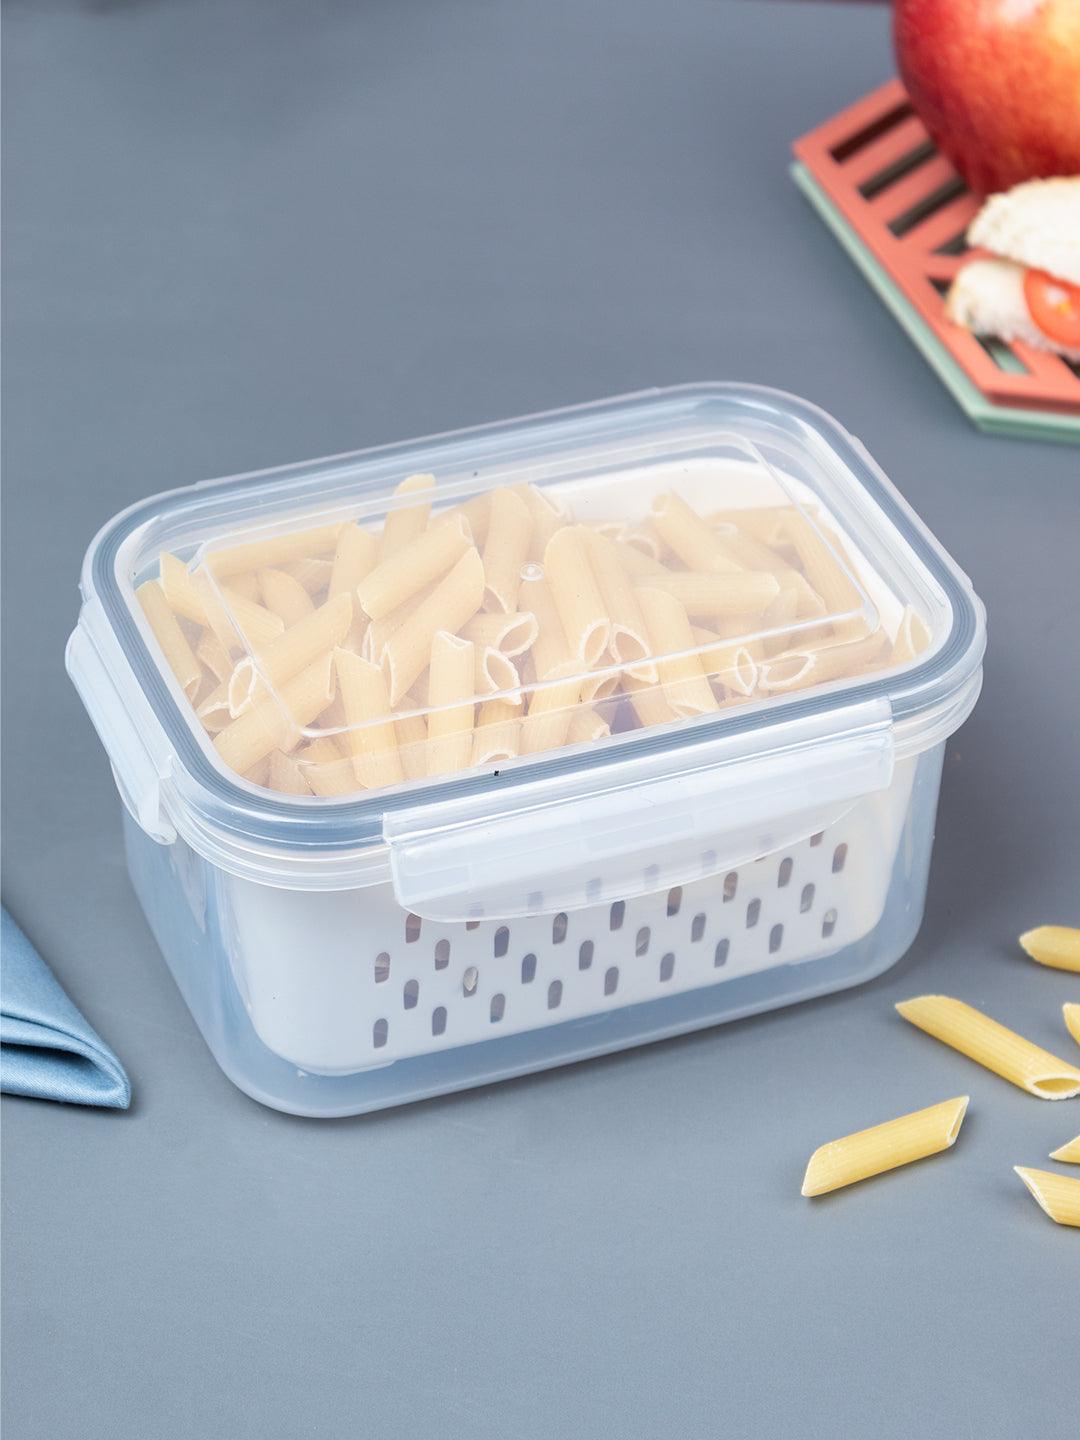 Kitchen Food Storage Containers - 800ml, Plastic